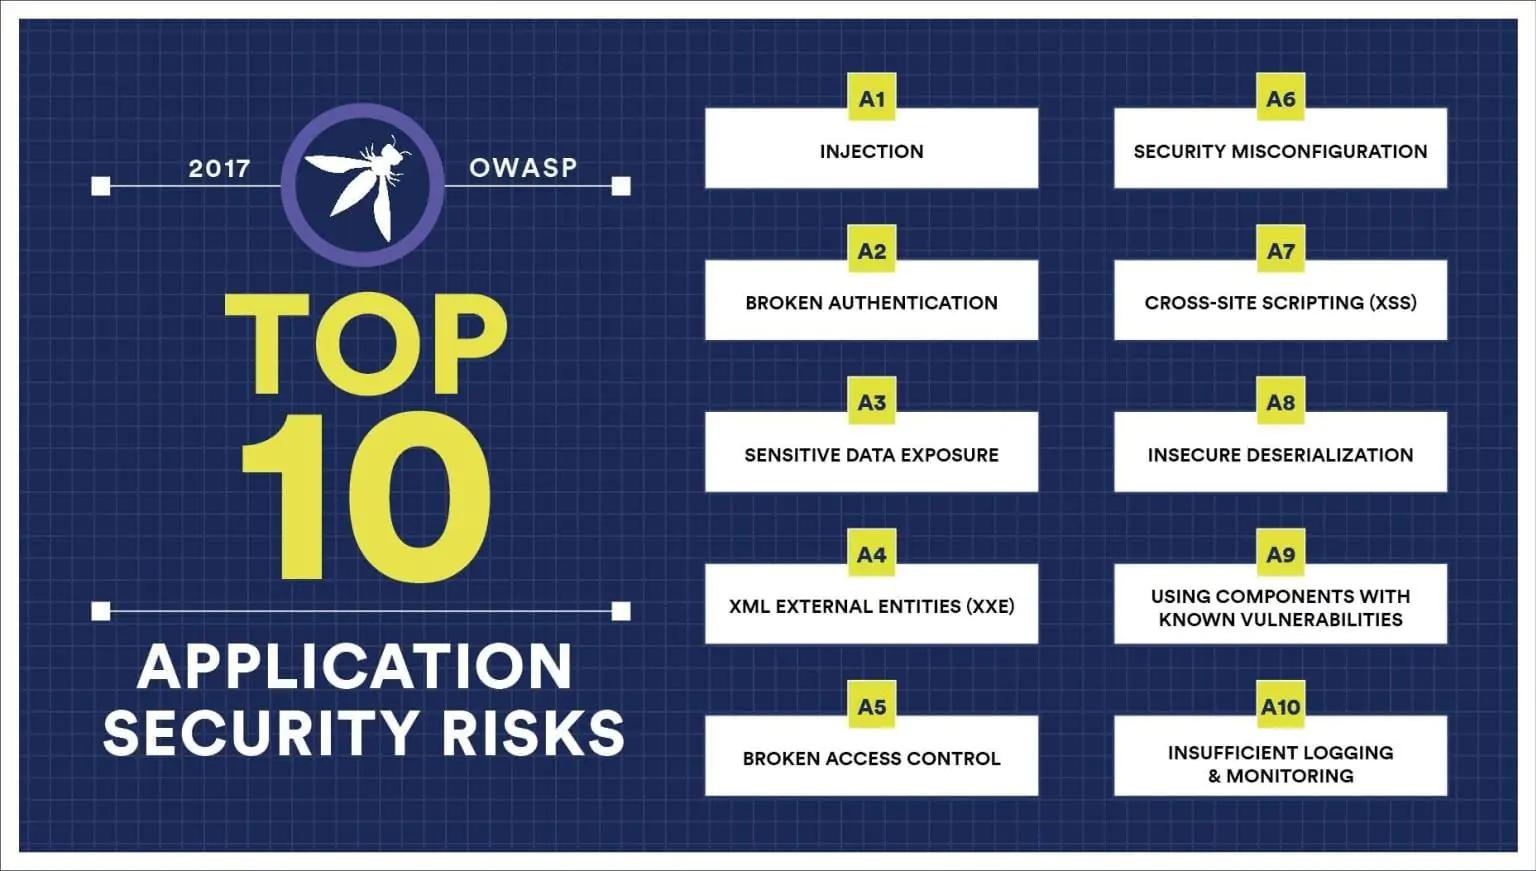 The current version of OWASP Top 10 vulnerabilities (2017)